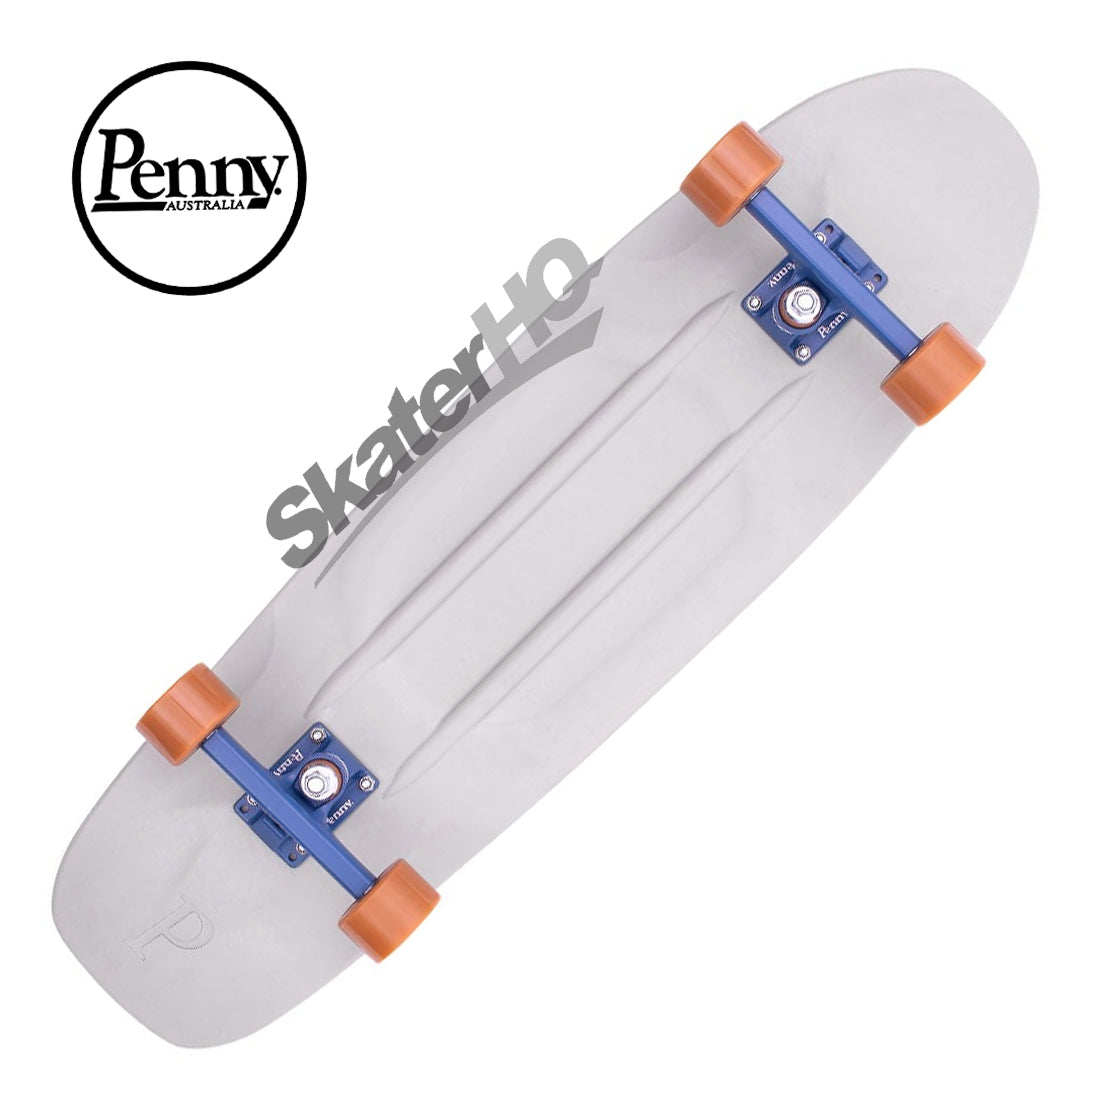 Penny 32 Hybrid Cruiser Complete - Stone Forest Skateboard Compl Cruisers